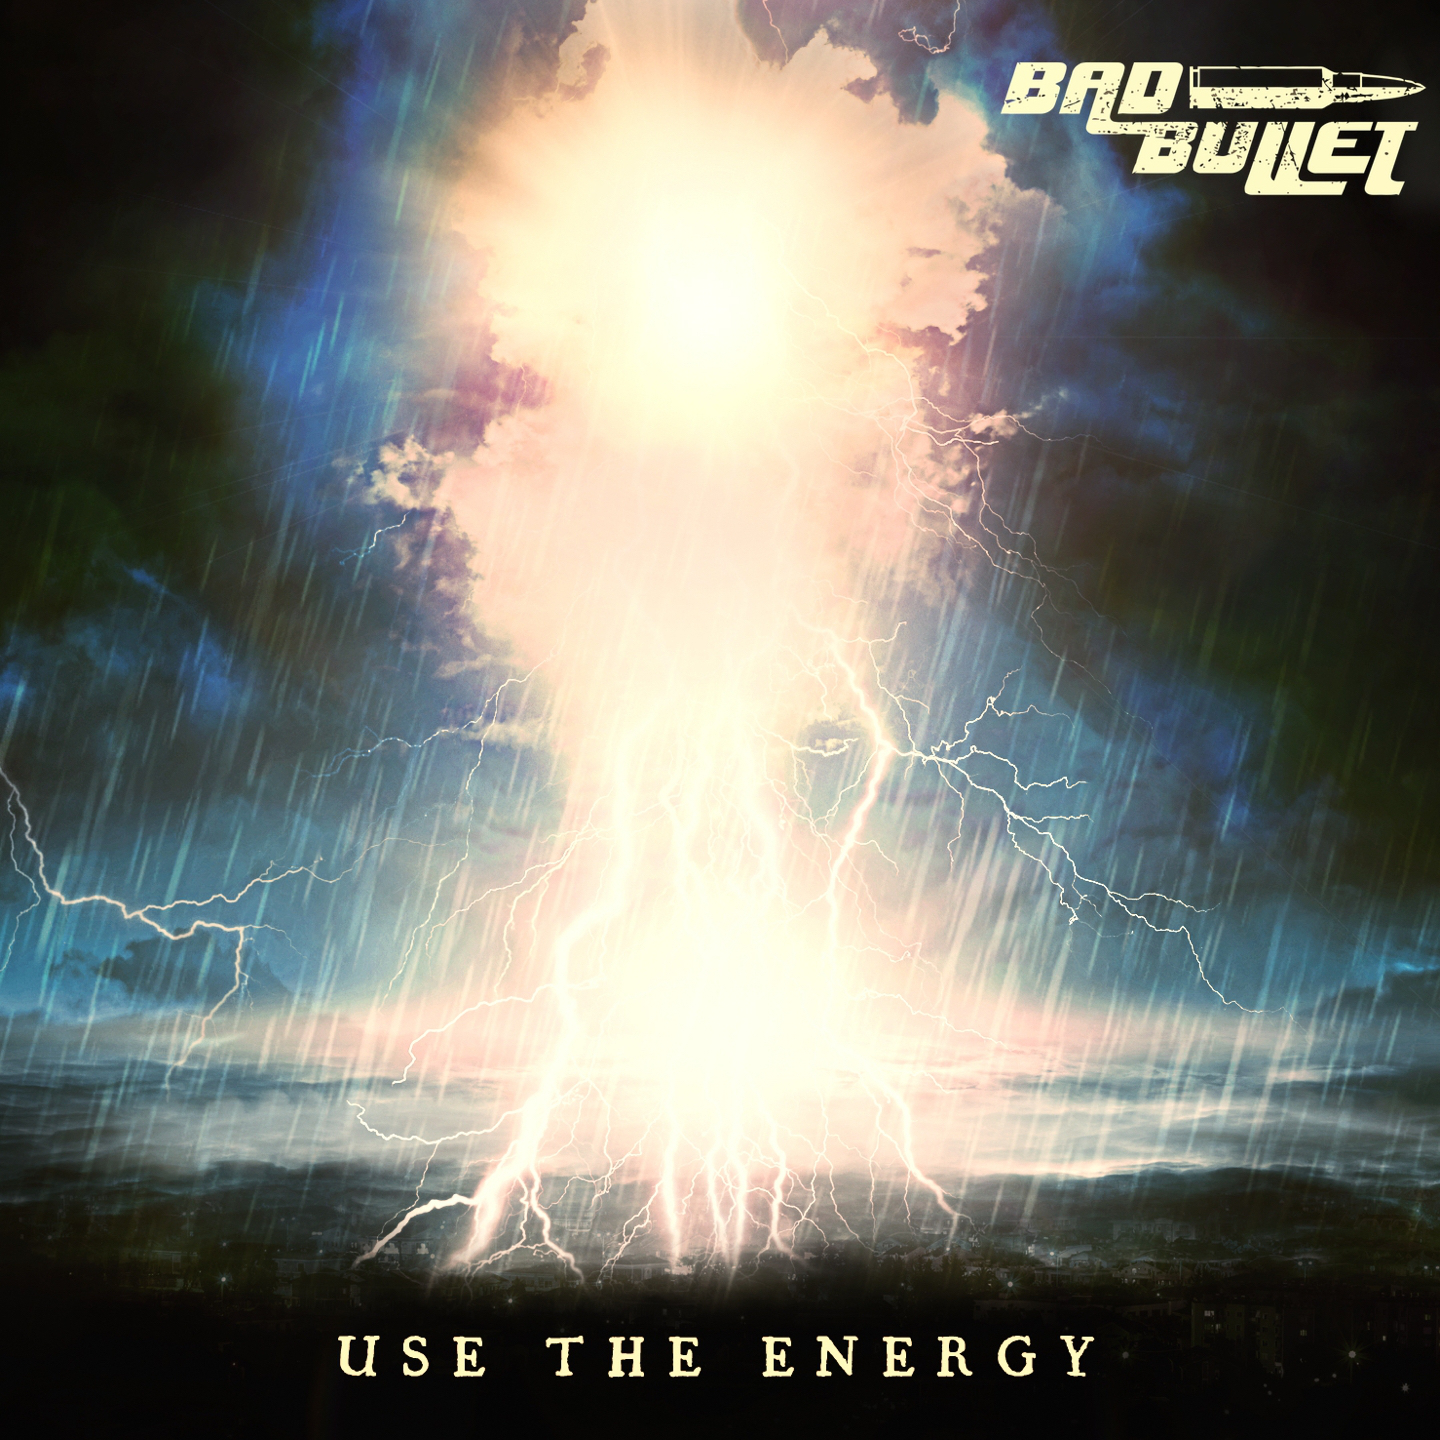 bad-bullet-use-the-energy-ein-cd-review